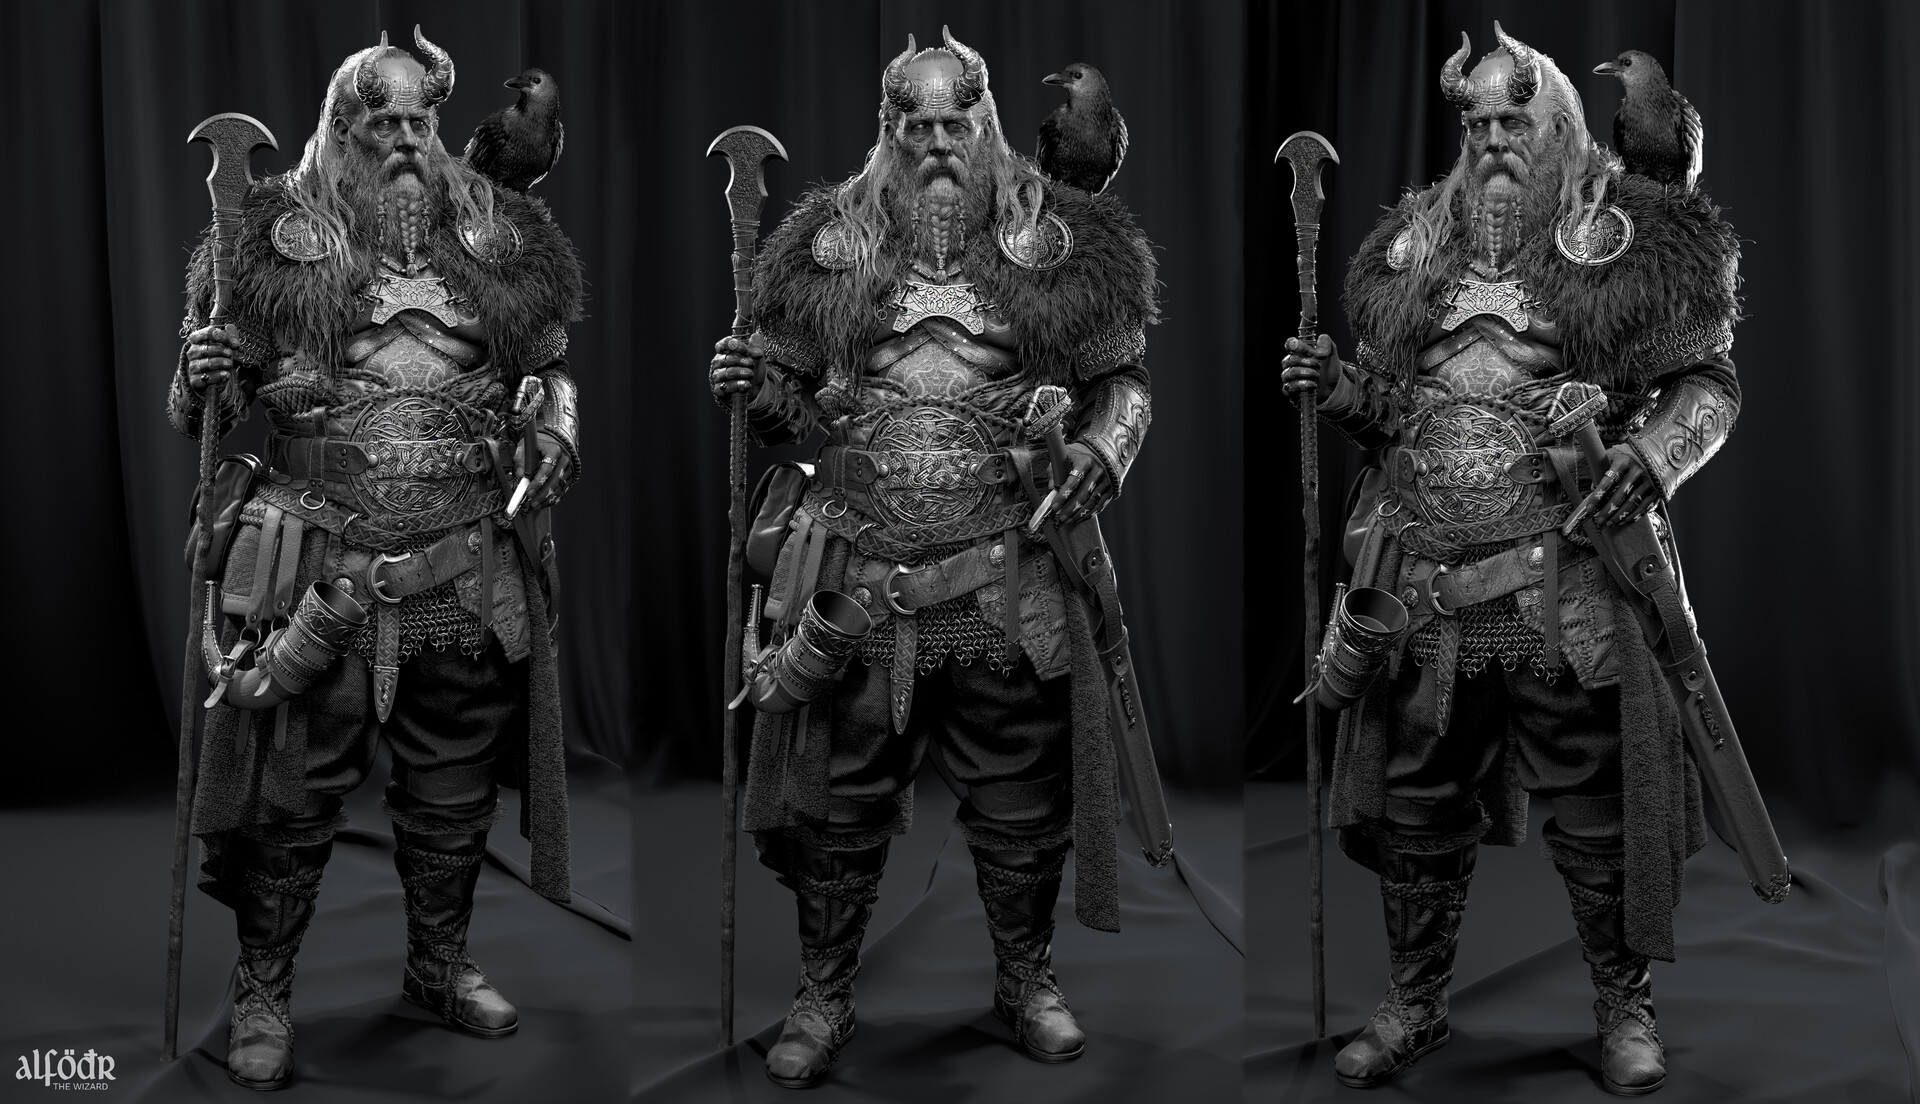 The Depiction of Odin in God of War: Ragnarok by Honored Madman